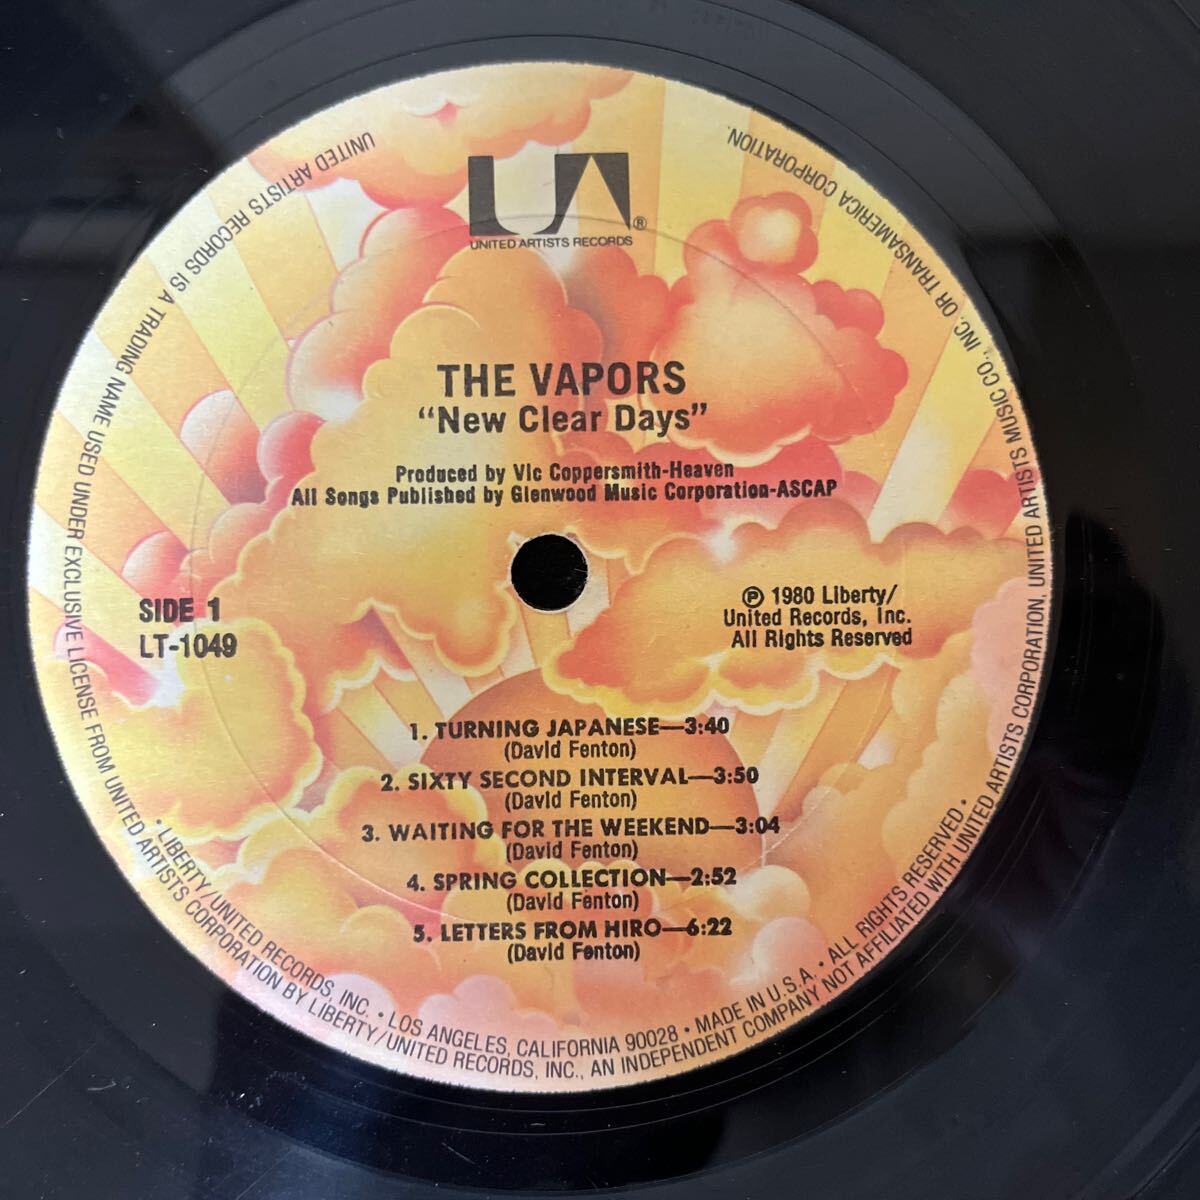 【LP】The Vapors / New Clear Days United Artists Records LT-1049 US Orig 1980 検) New Wave Power Pop Punk パンク天国_画像6